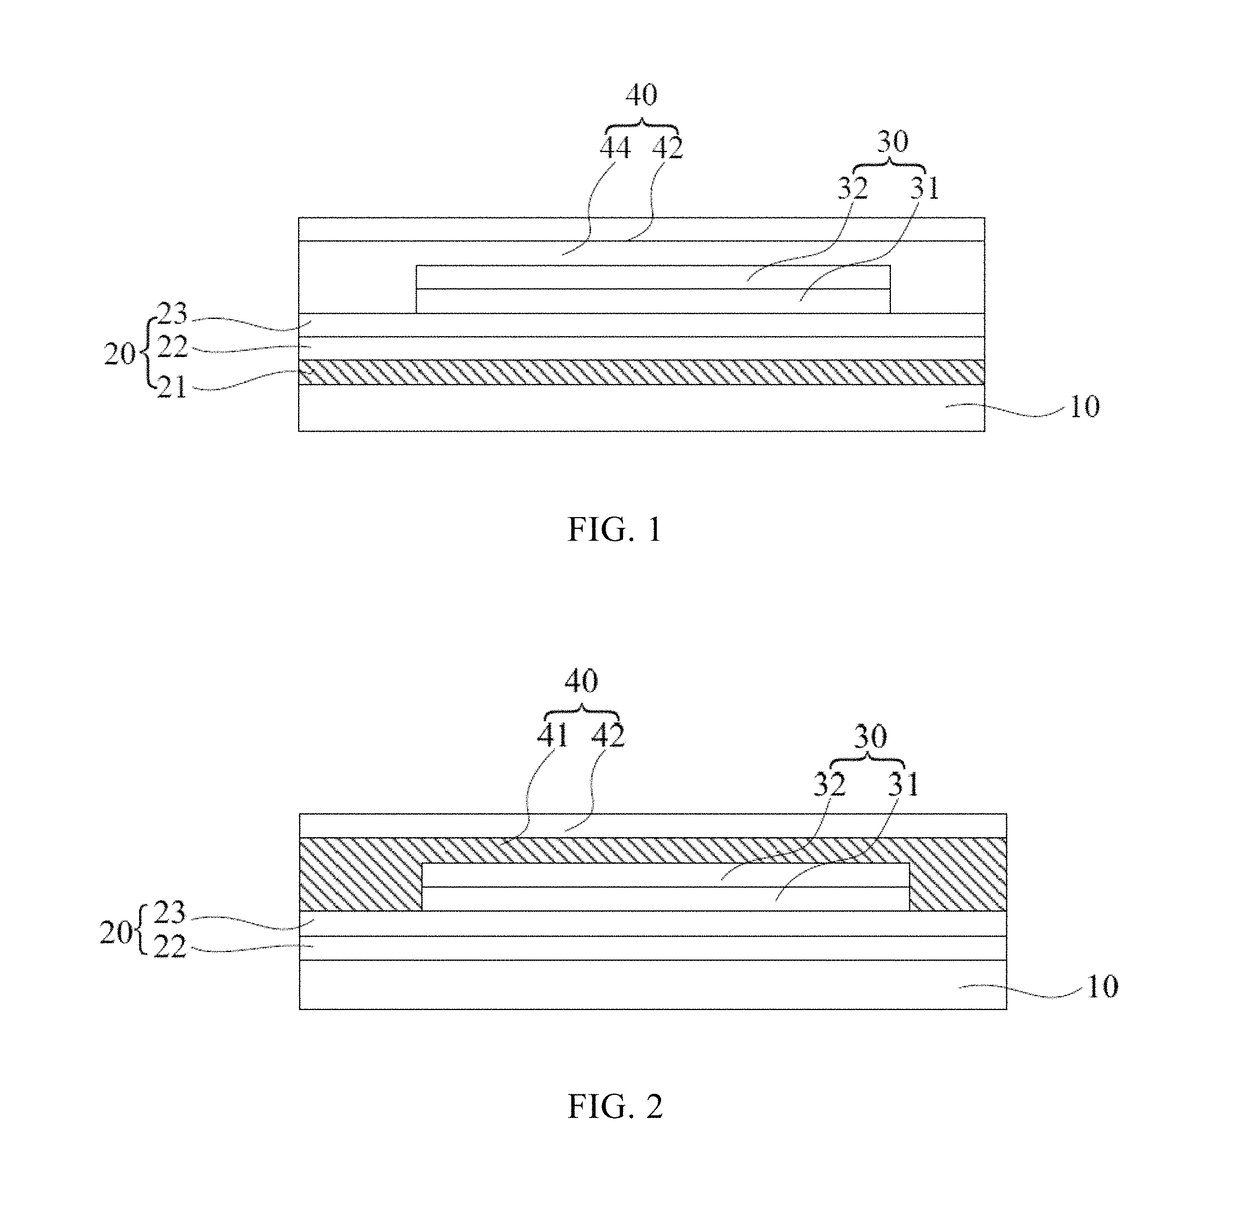 Flexible display device having a self-healing capability and fabrication method thereof